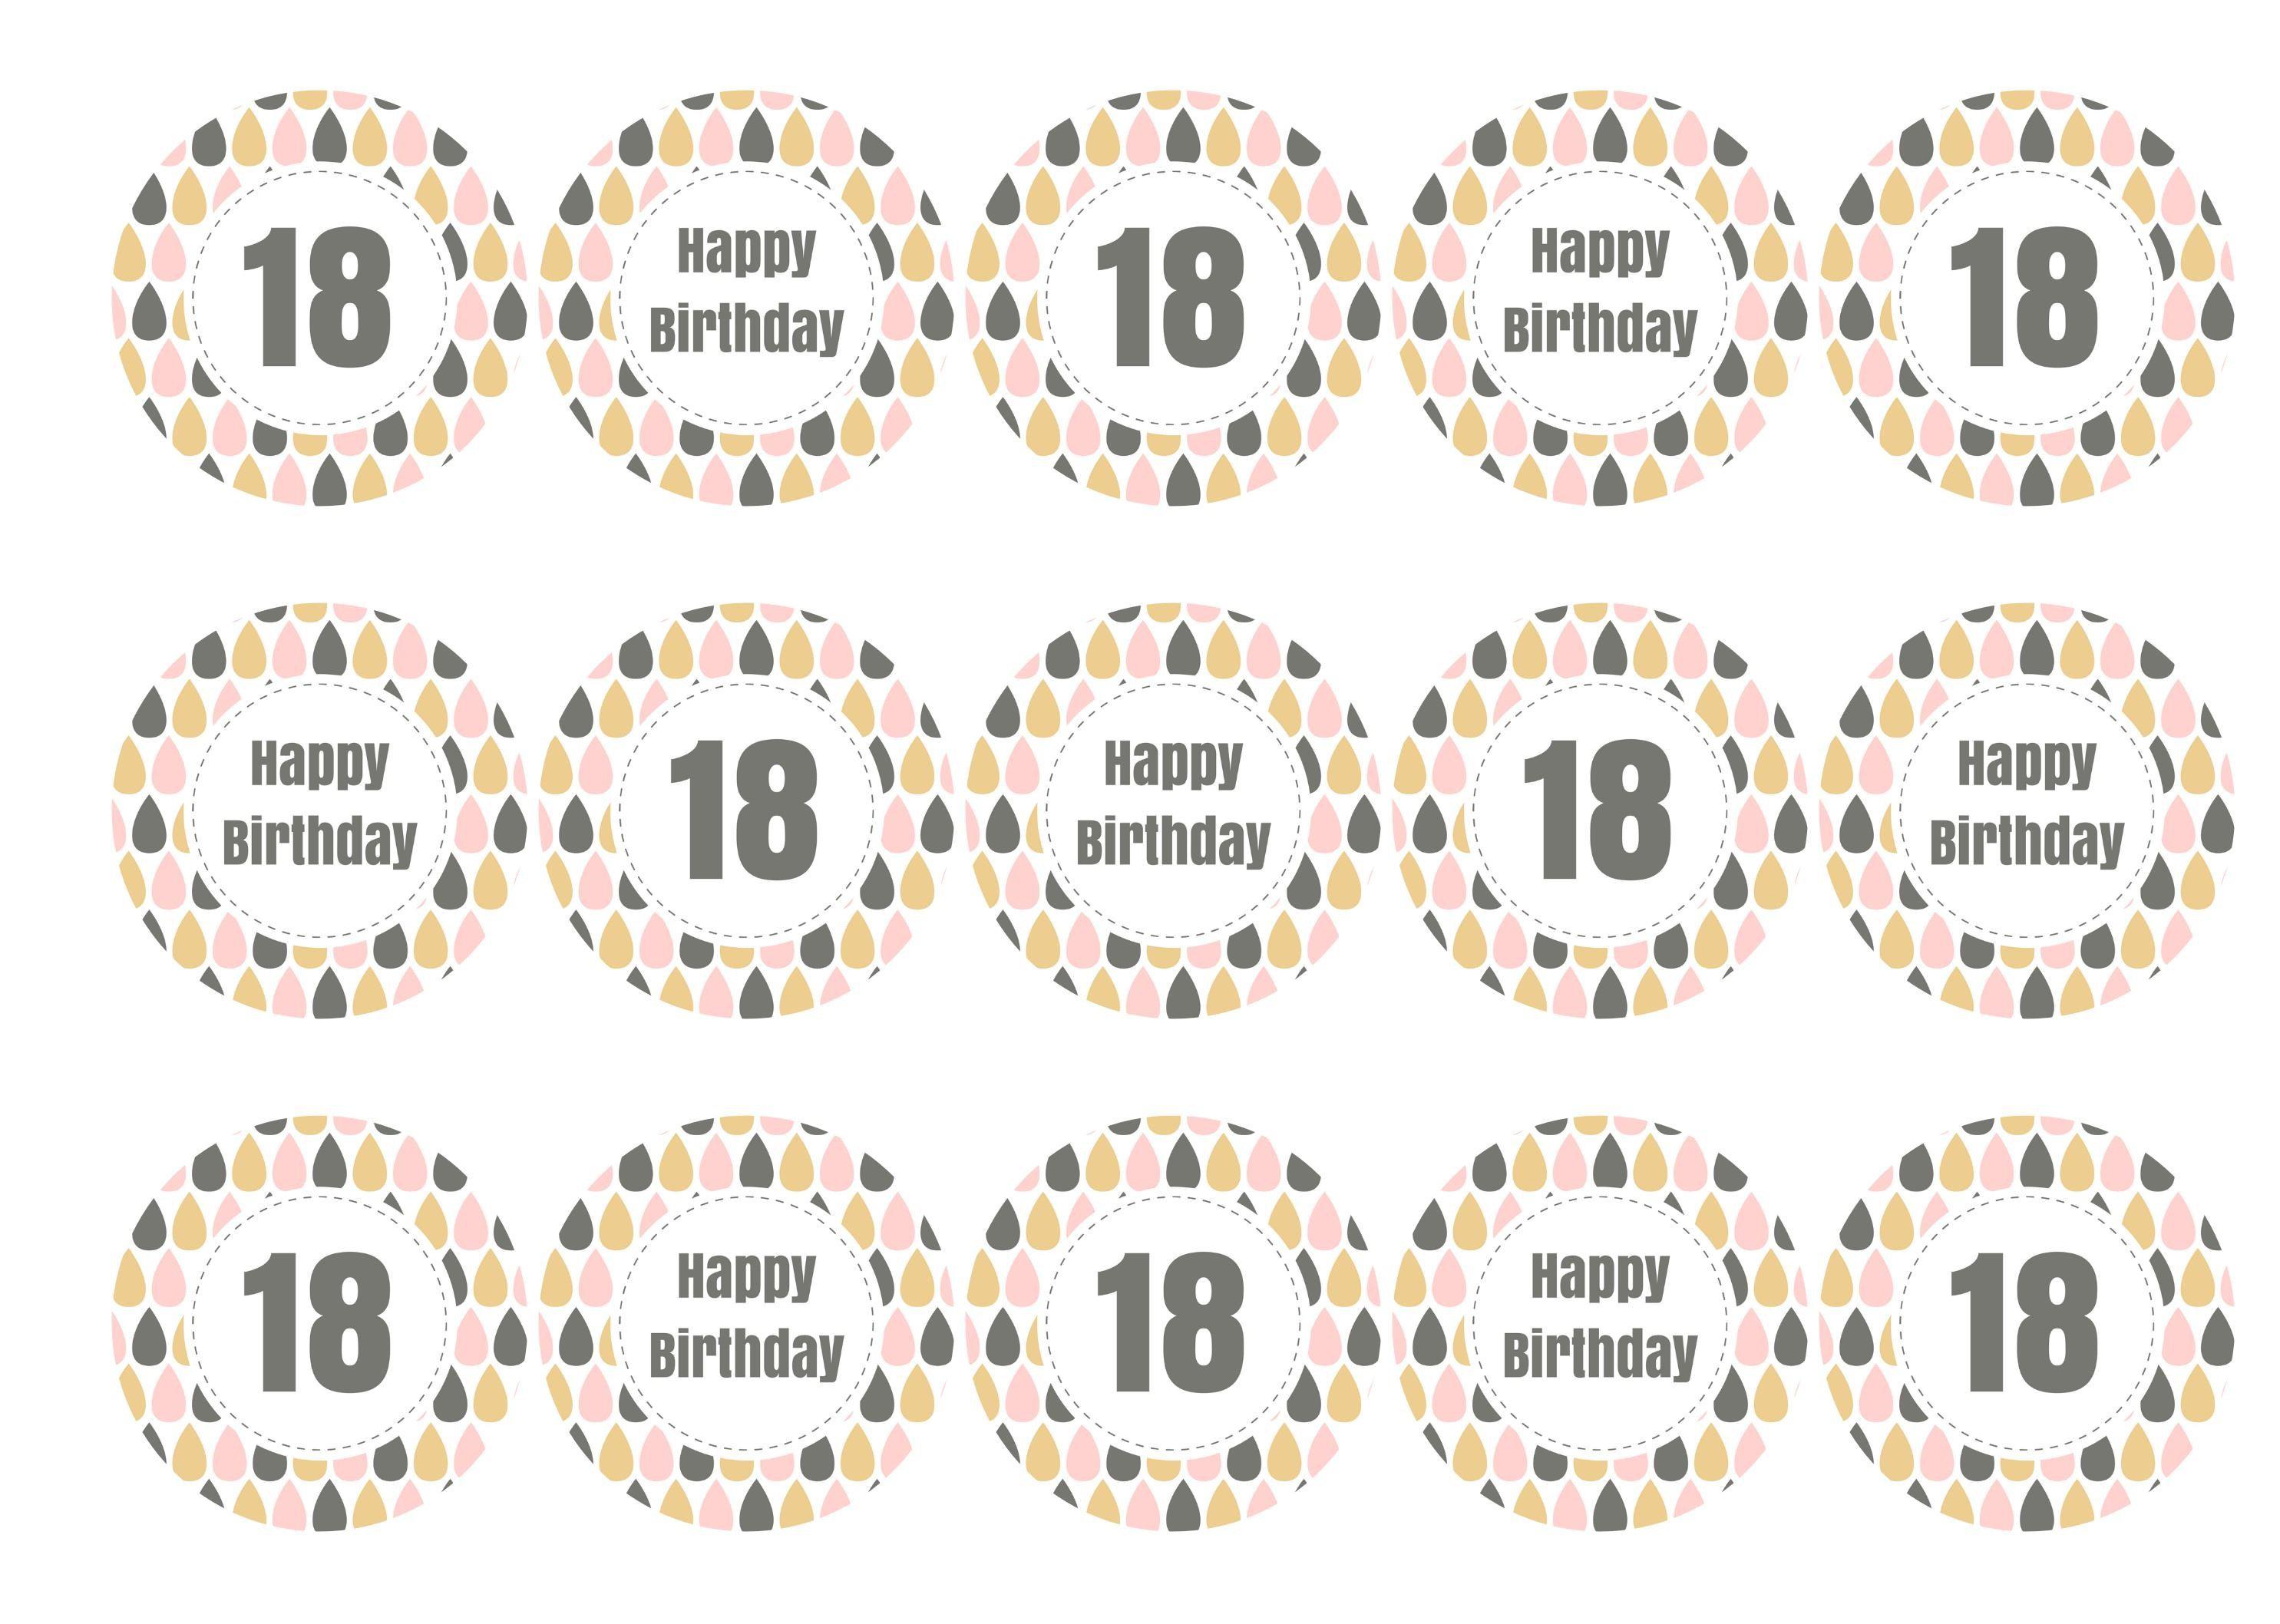 Edible cupcake toppers for an 18th birthday